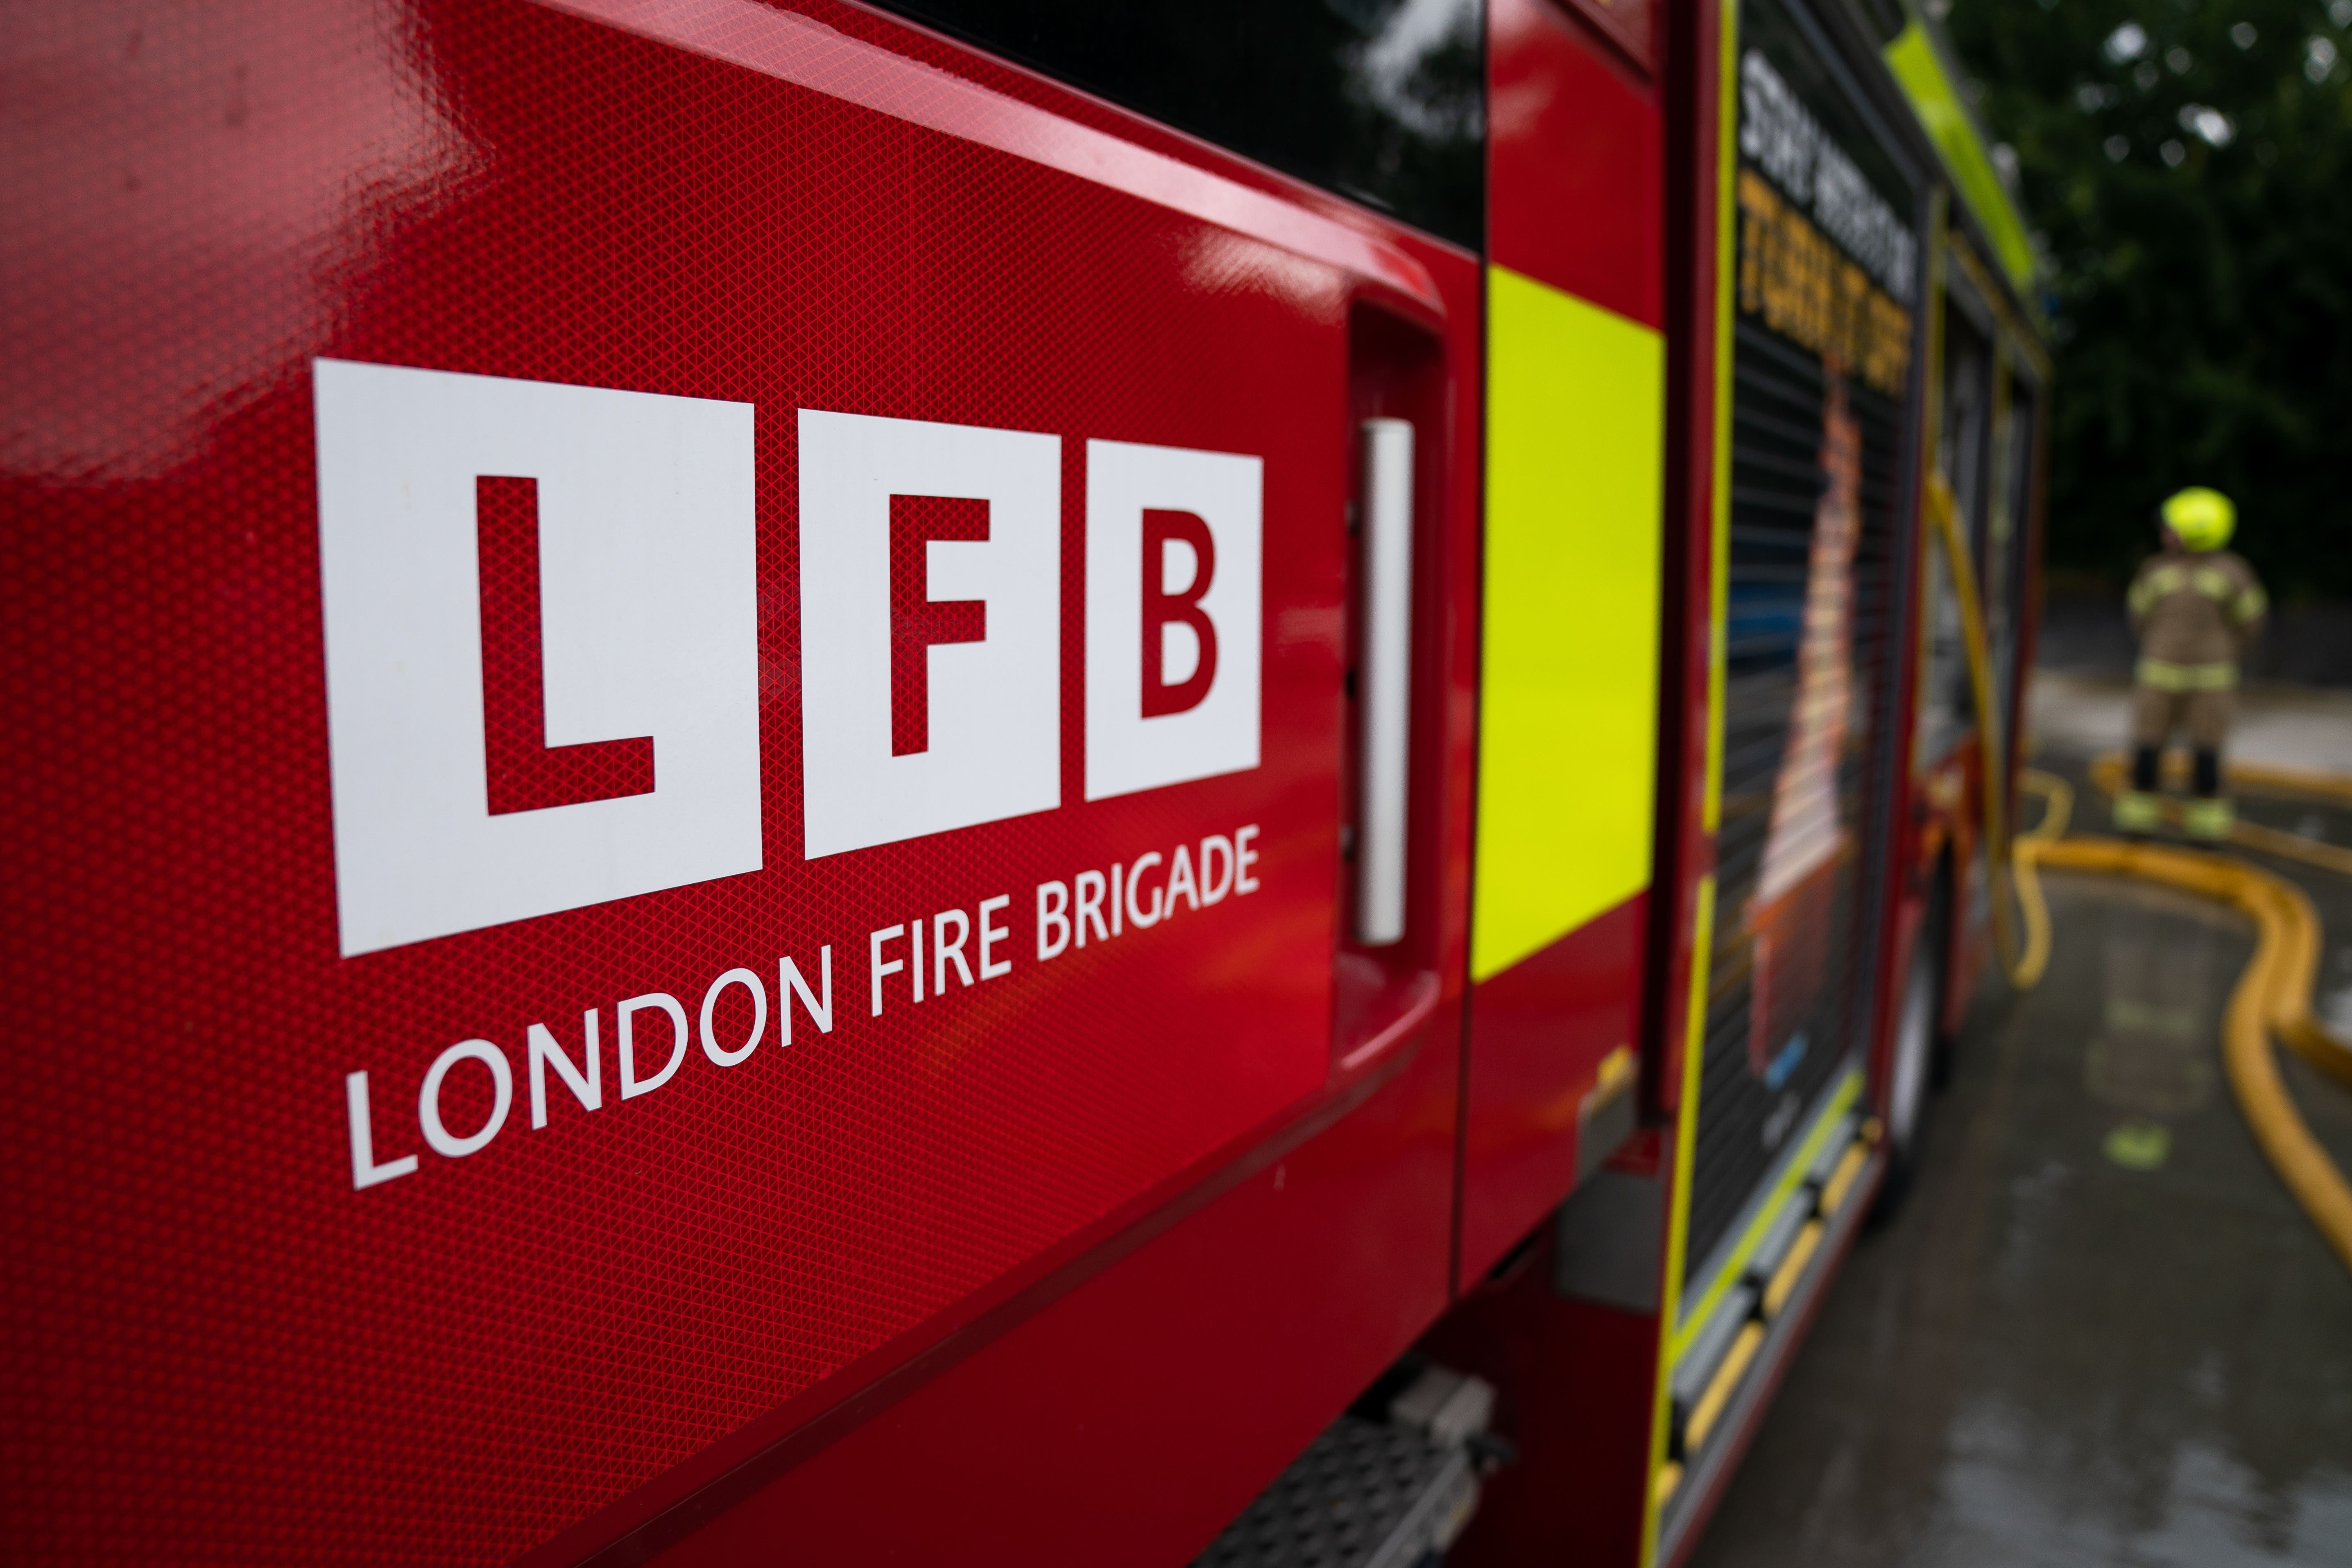 A review has found London Fire Brigade to be institutionally misogynist and racist